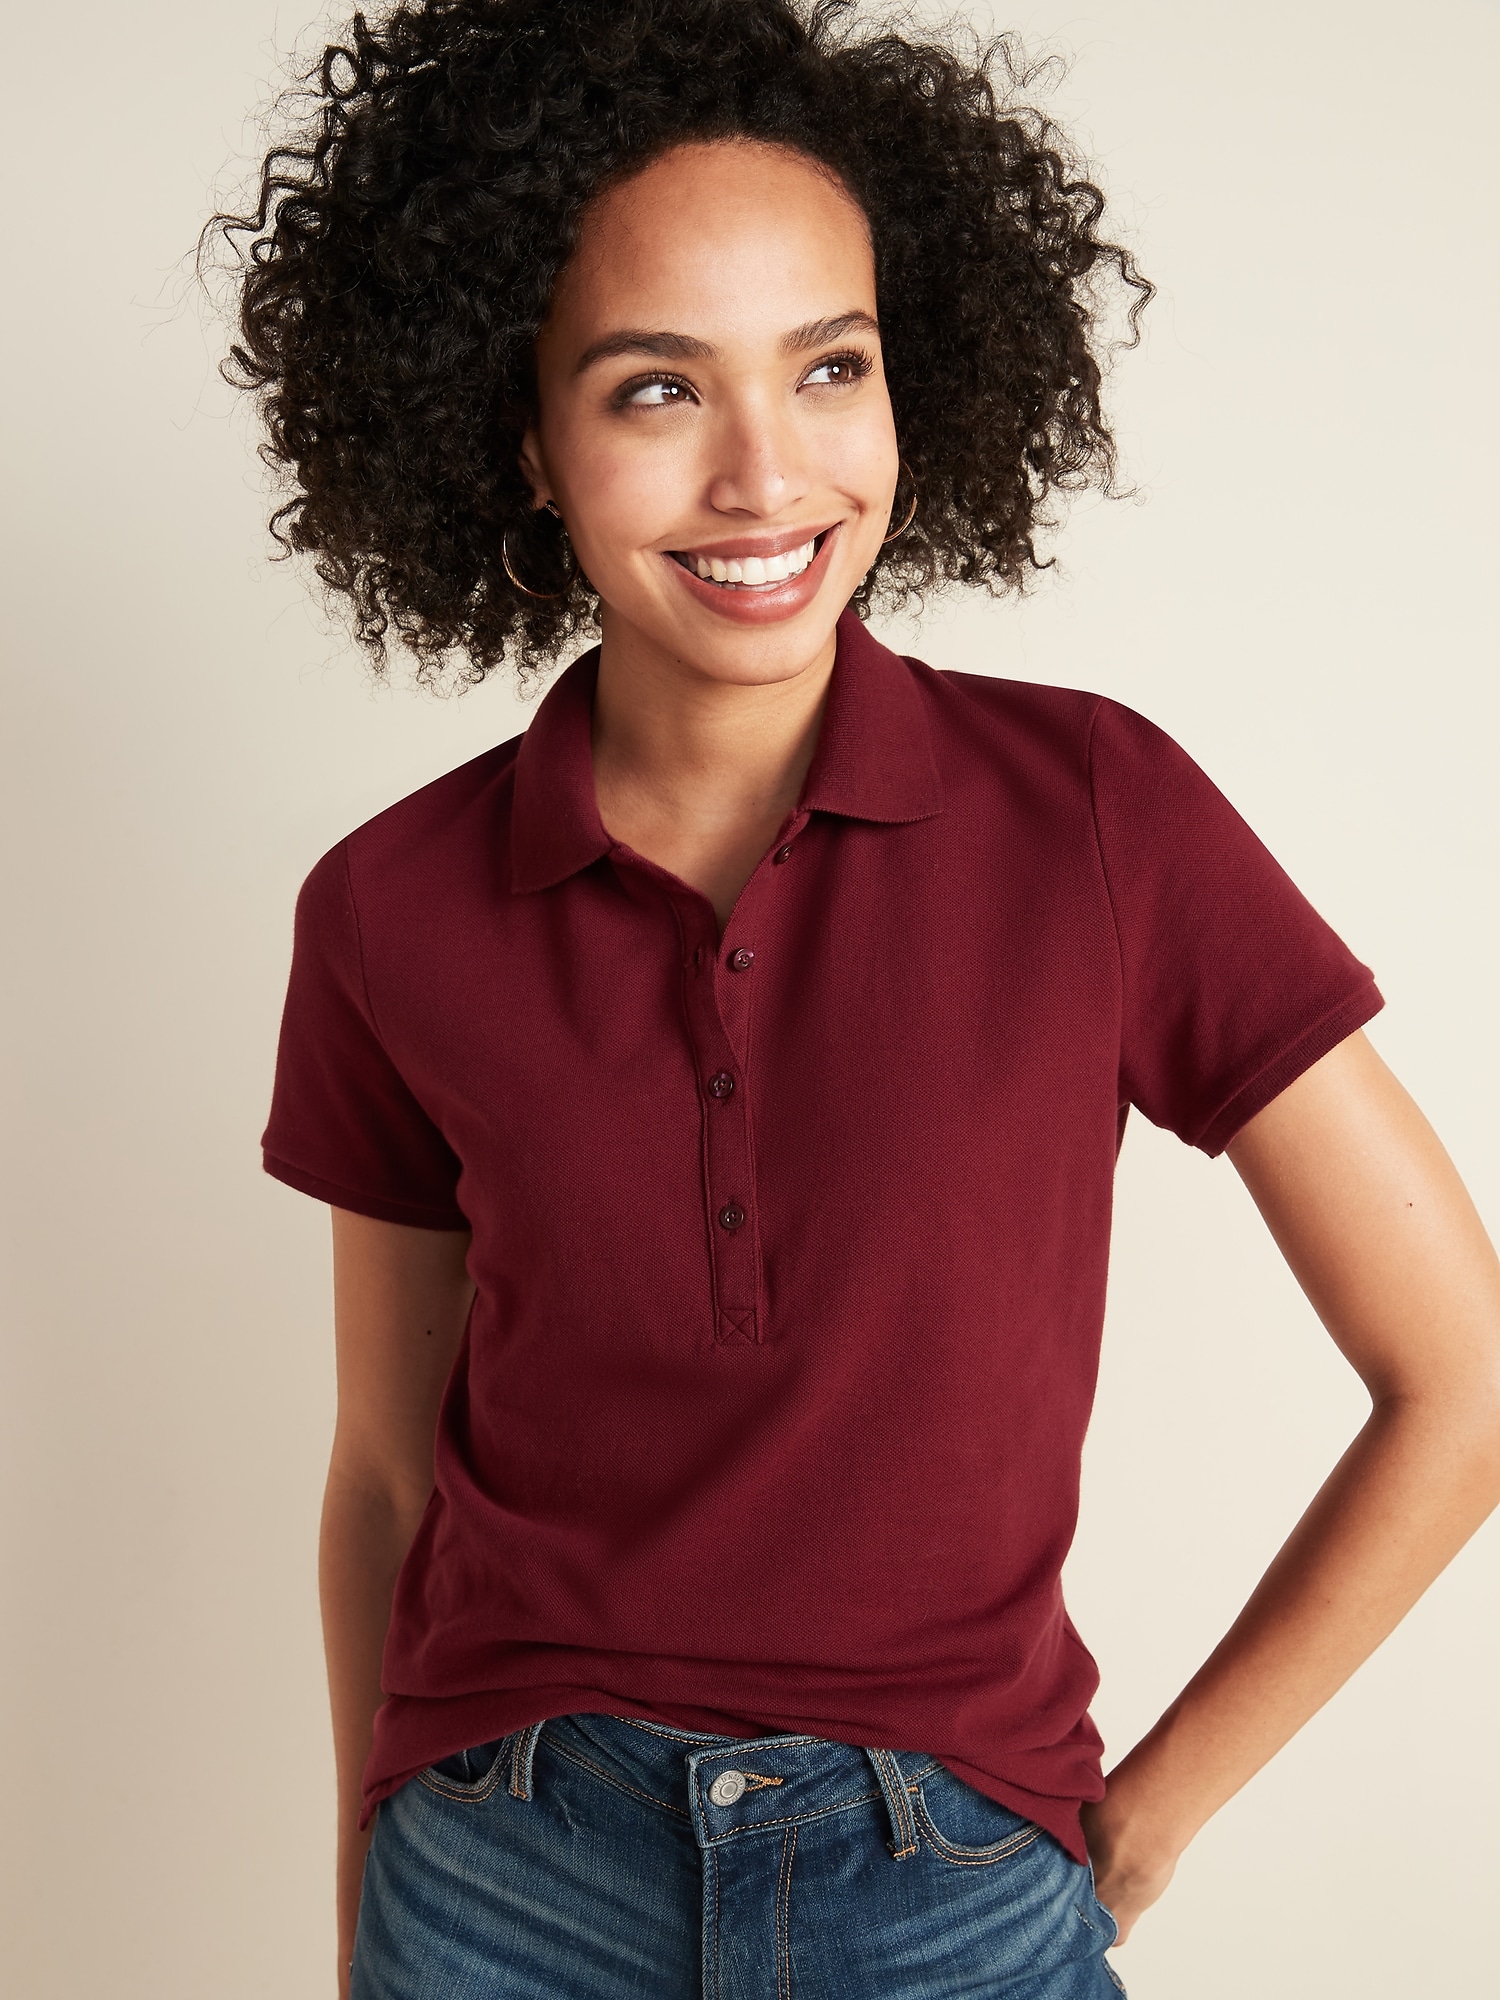 old navy ladies polo shirts